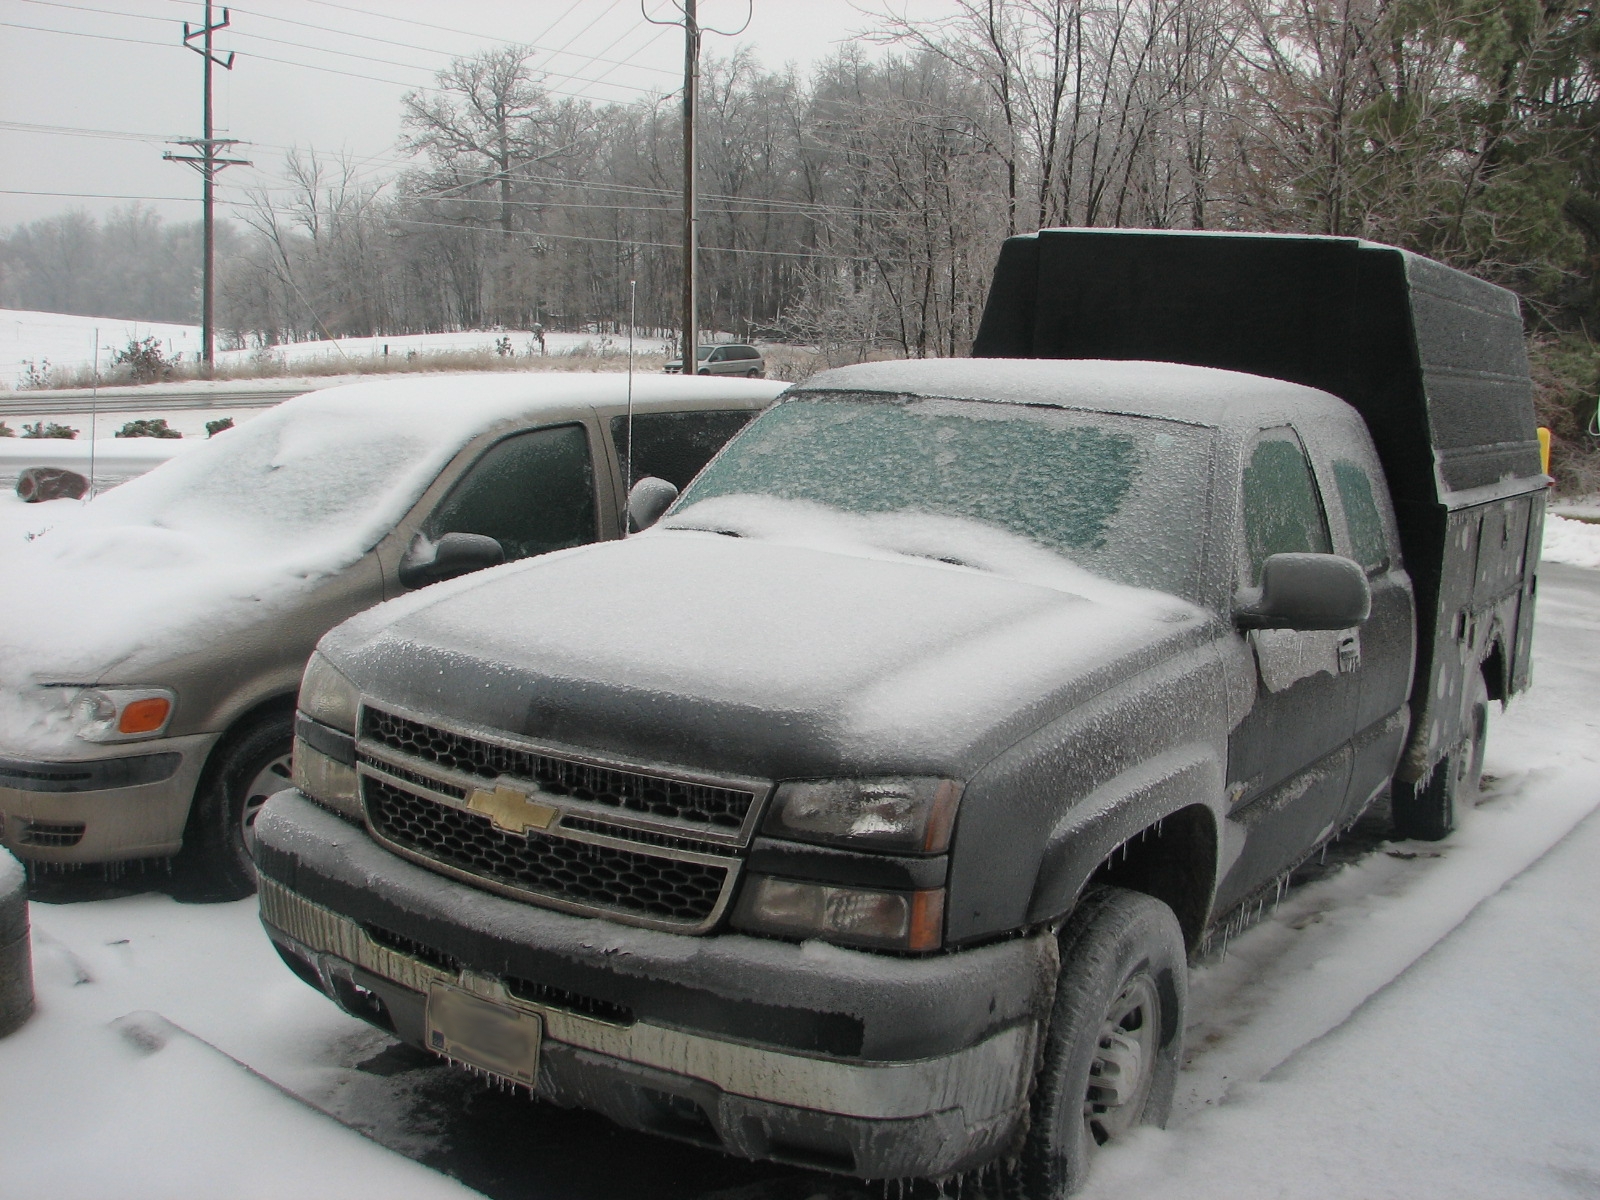 vehicles covered in a thick layer of sleet and ice.